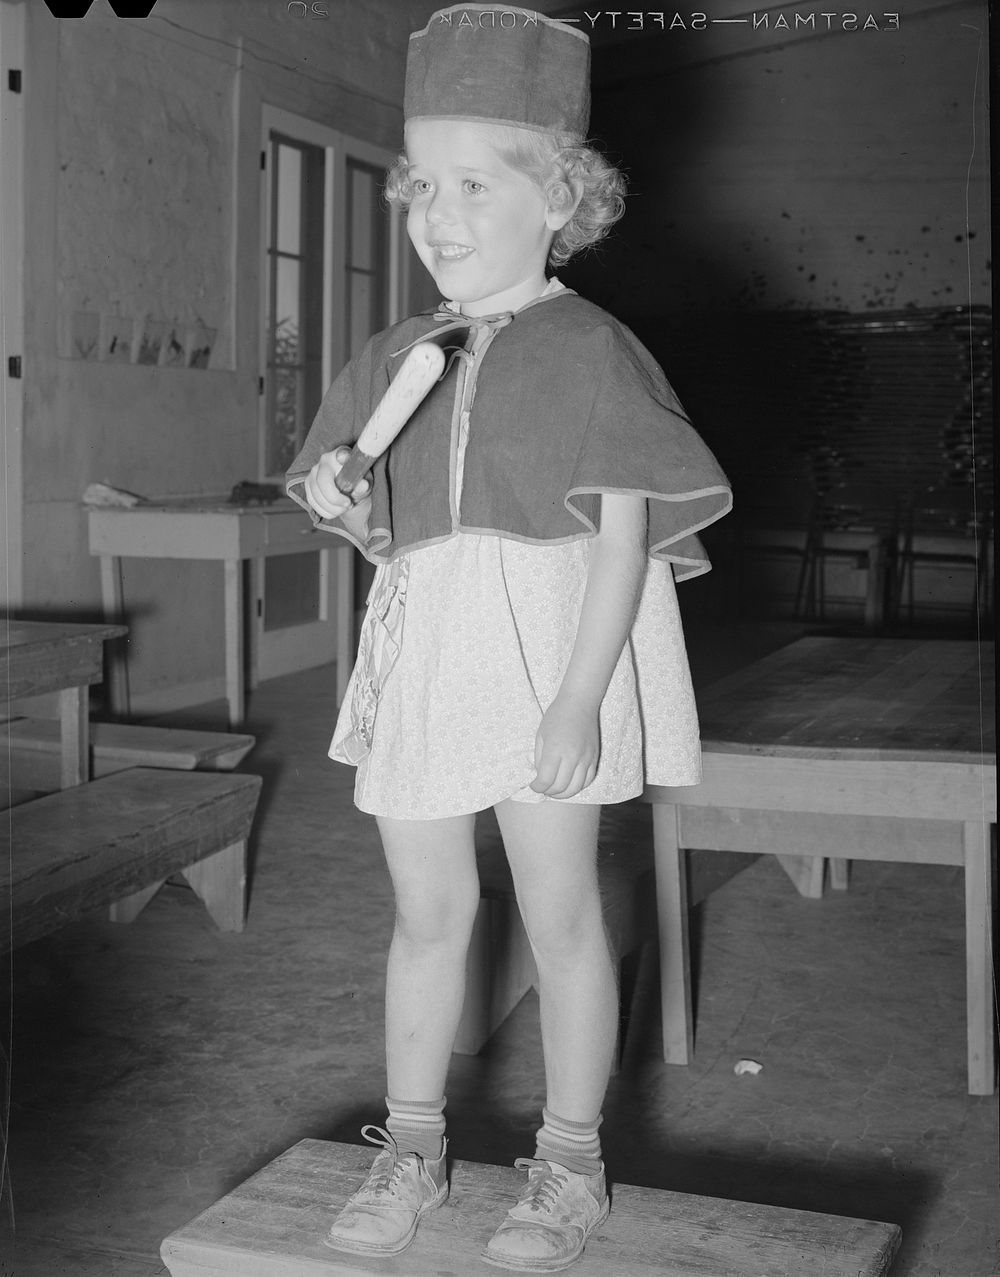 Little girl at the Casa Grande Valley Farms, Arizona, WPA (Work Projects Administration) nursery school leading the "band"…